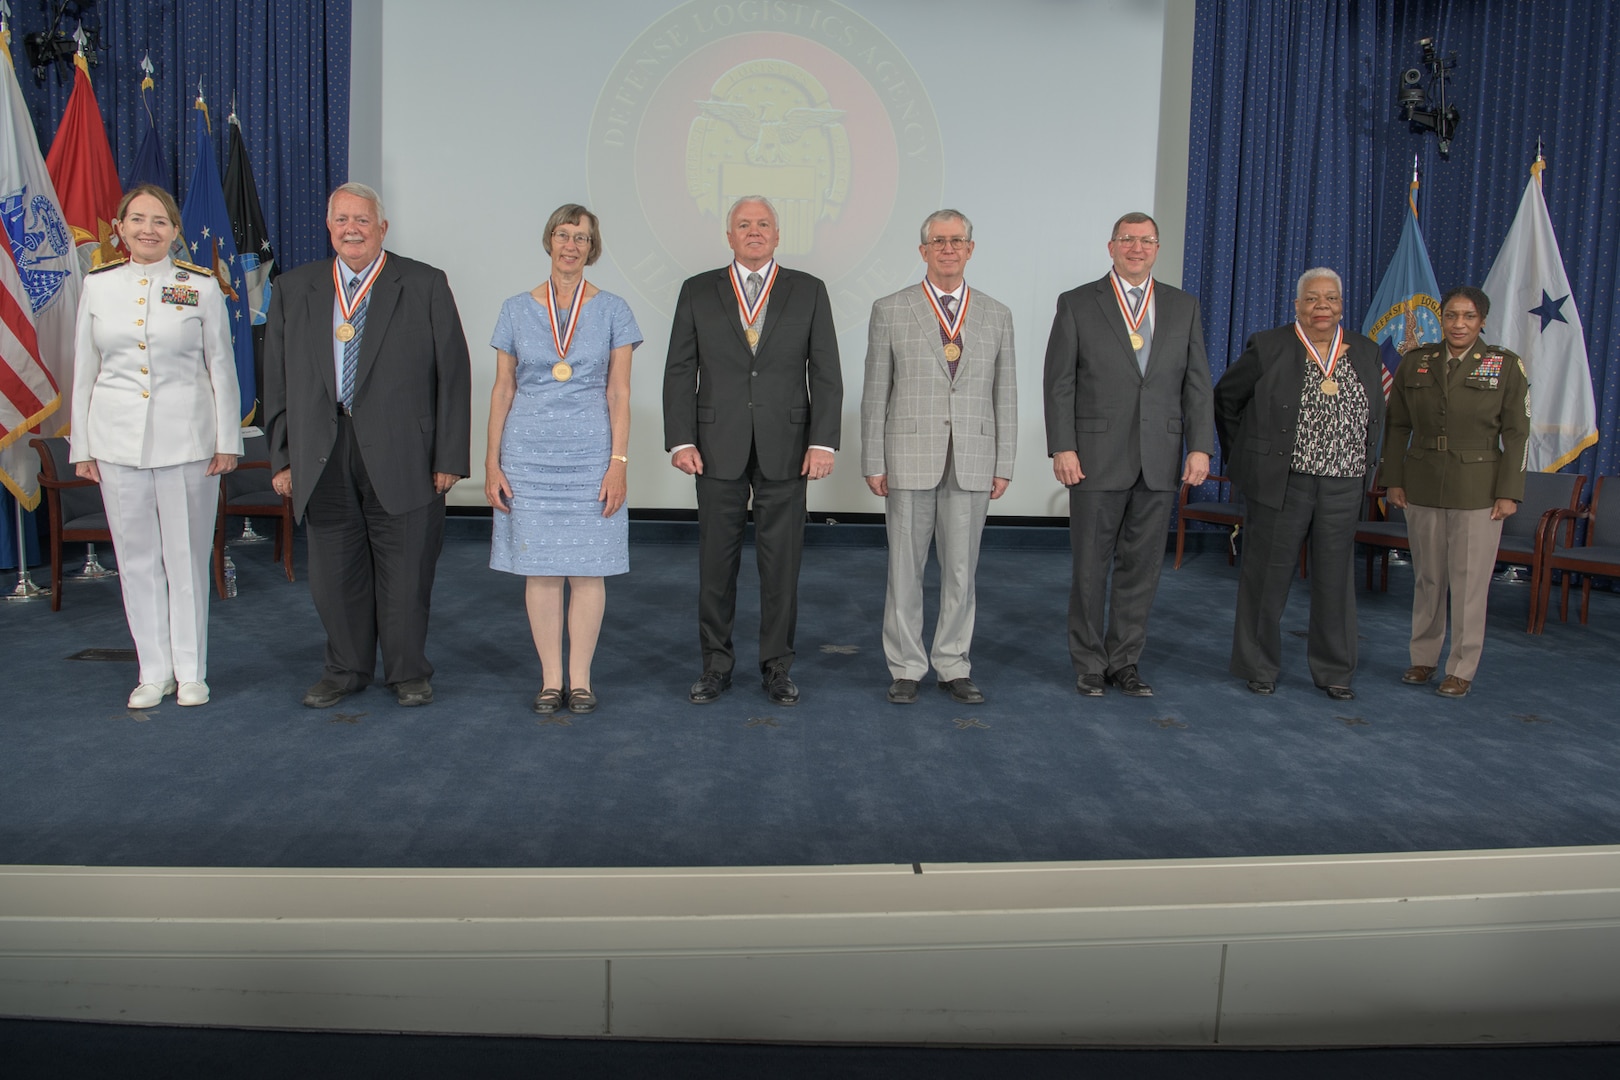 The six new members of DLA's Hall of Fame stand on a stage with the agency's director and senior enlisted leader.